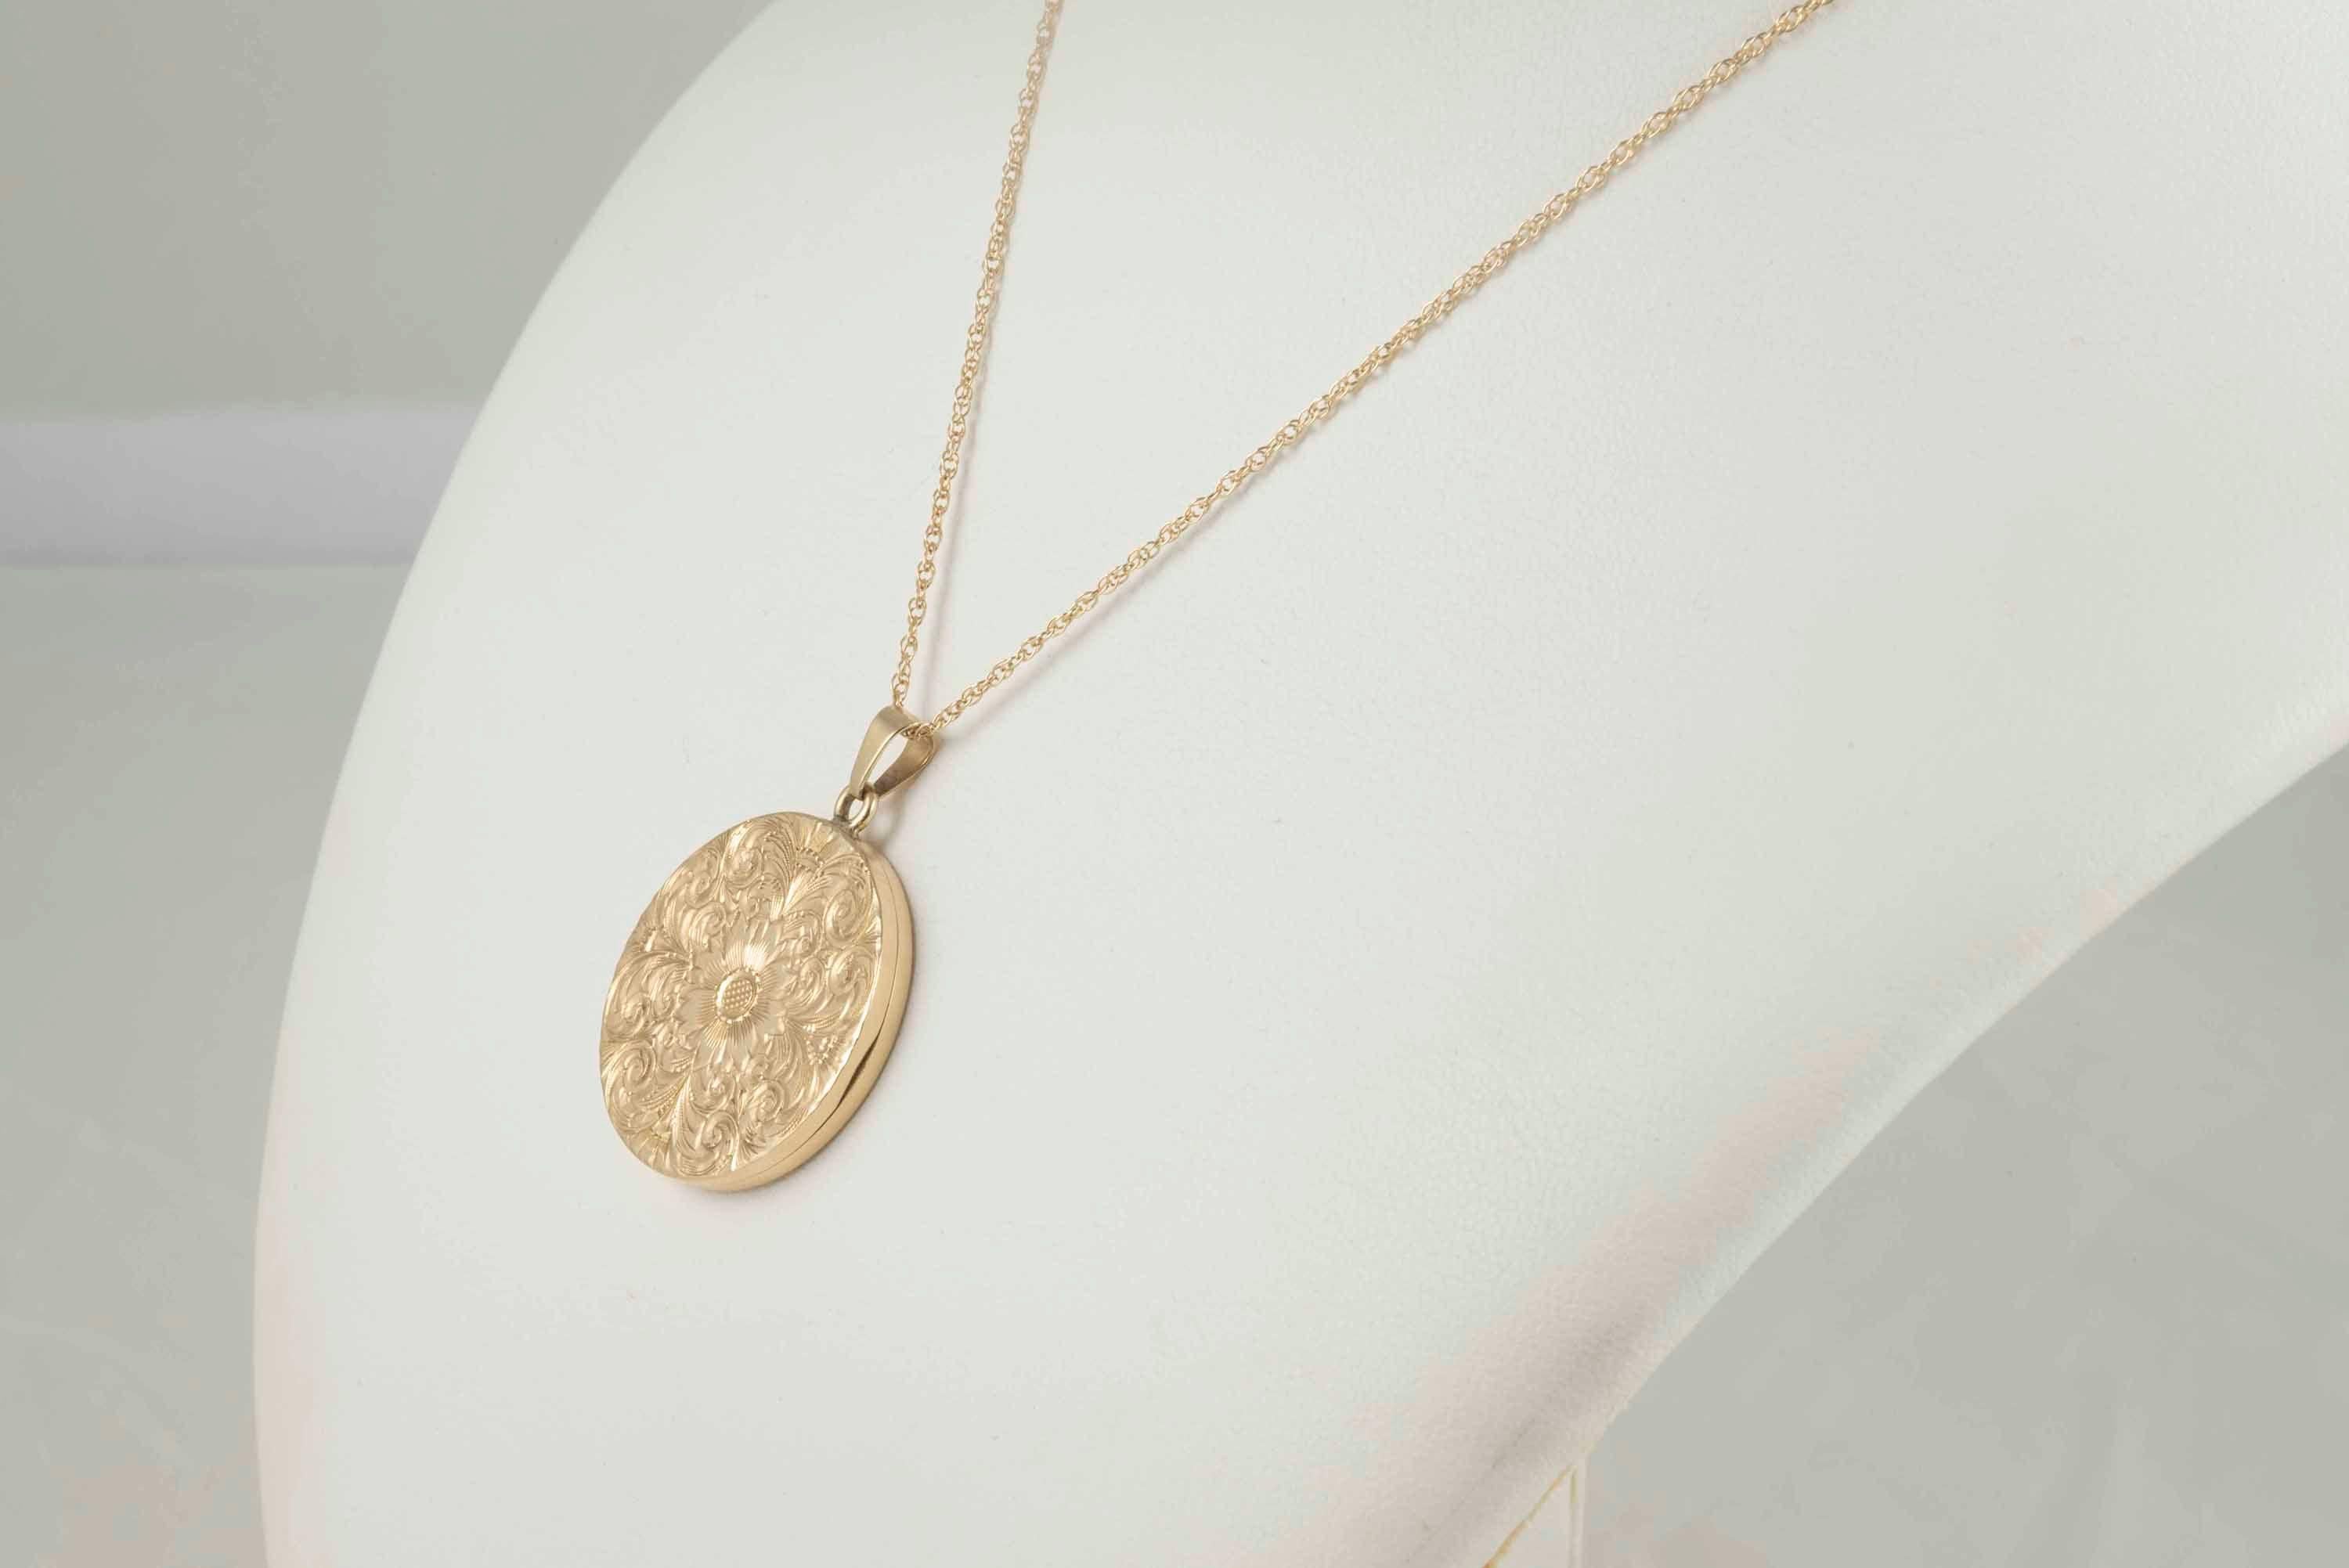 Crafted in the 1940-50s from 14kt yellow gold, this round locket measuring 1.1 inches features a beautiful hand-crafted floral engraving. 
The chain measures 17 inches long. 